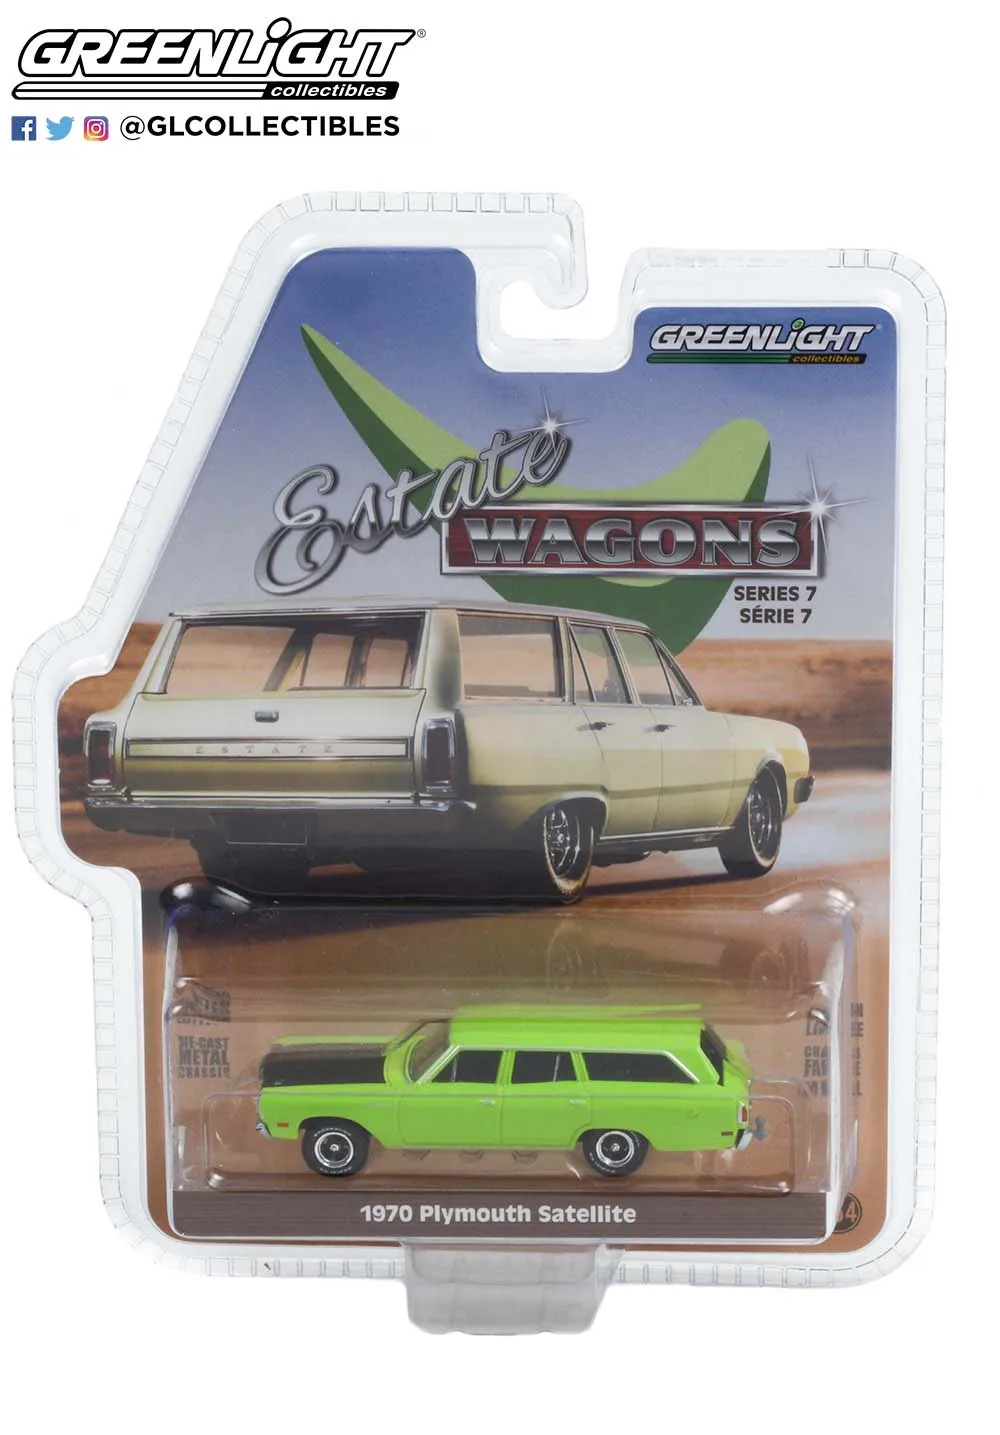 

1:64 GREENLIGHT Station wagon series 7-1970 Plymouth satellite collection die cast alloy car model ornaments